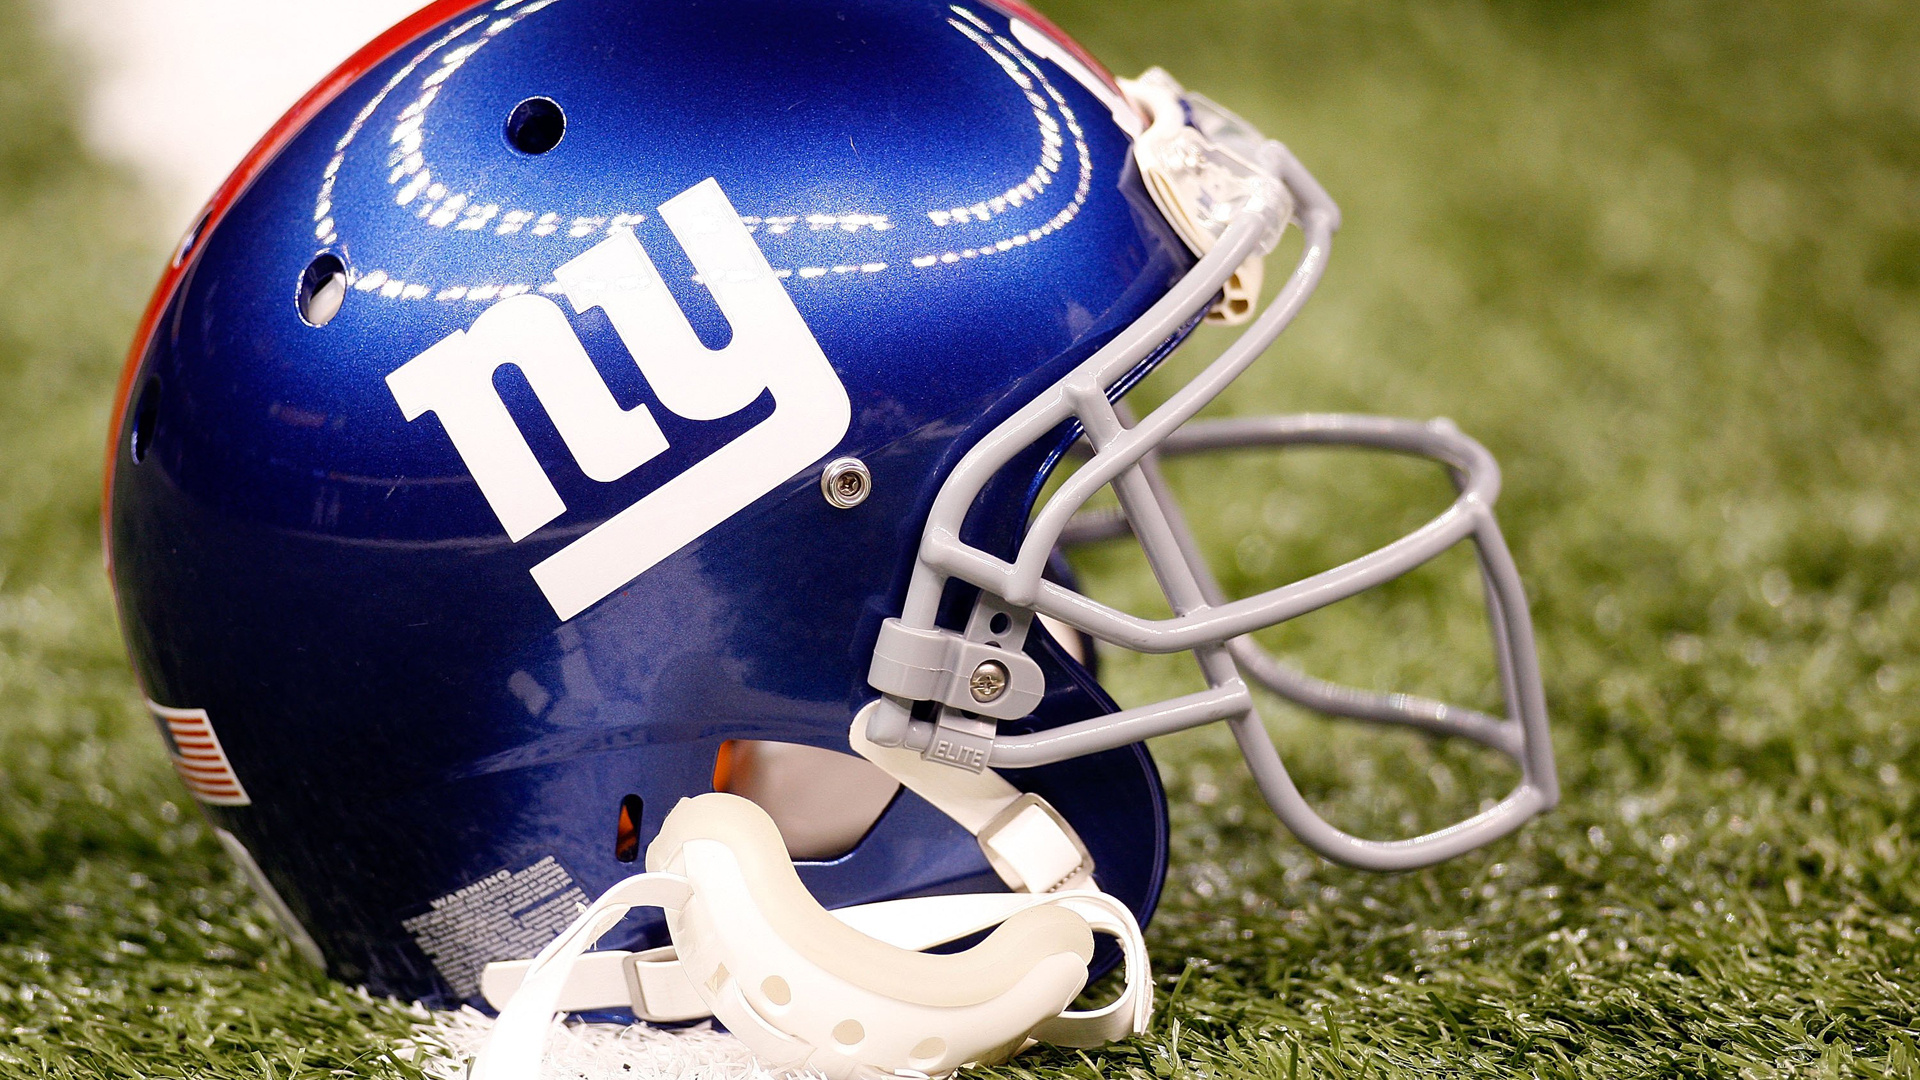 New York Giants: The ninth most valuable professional sports franchise across the globe. 1920x1080 Full HD Wallpaper.